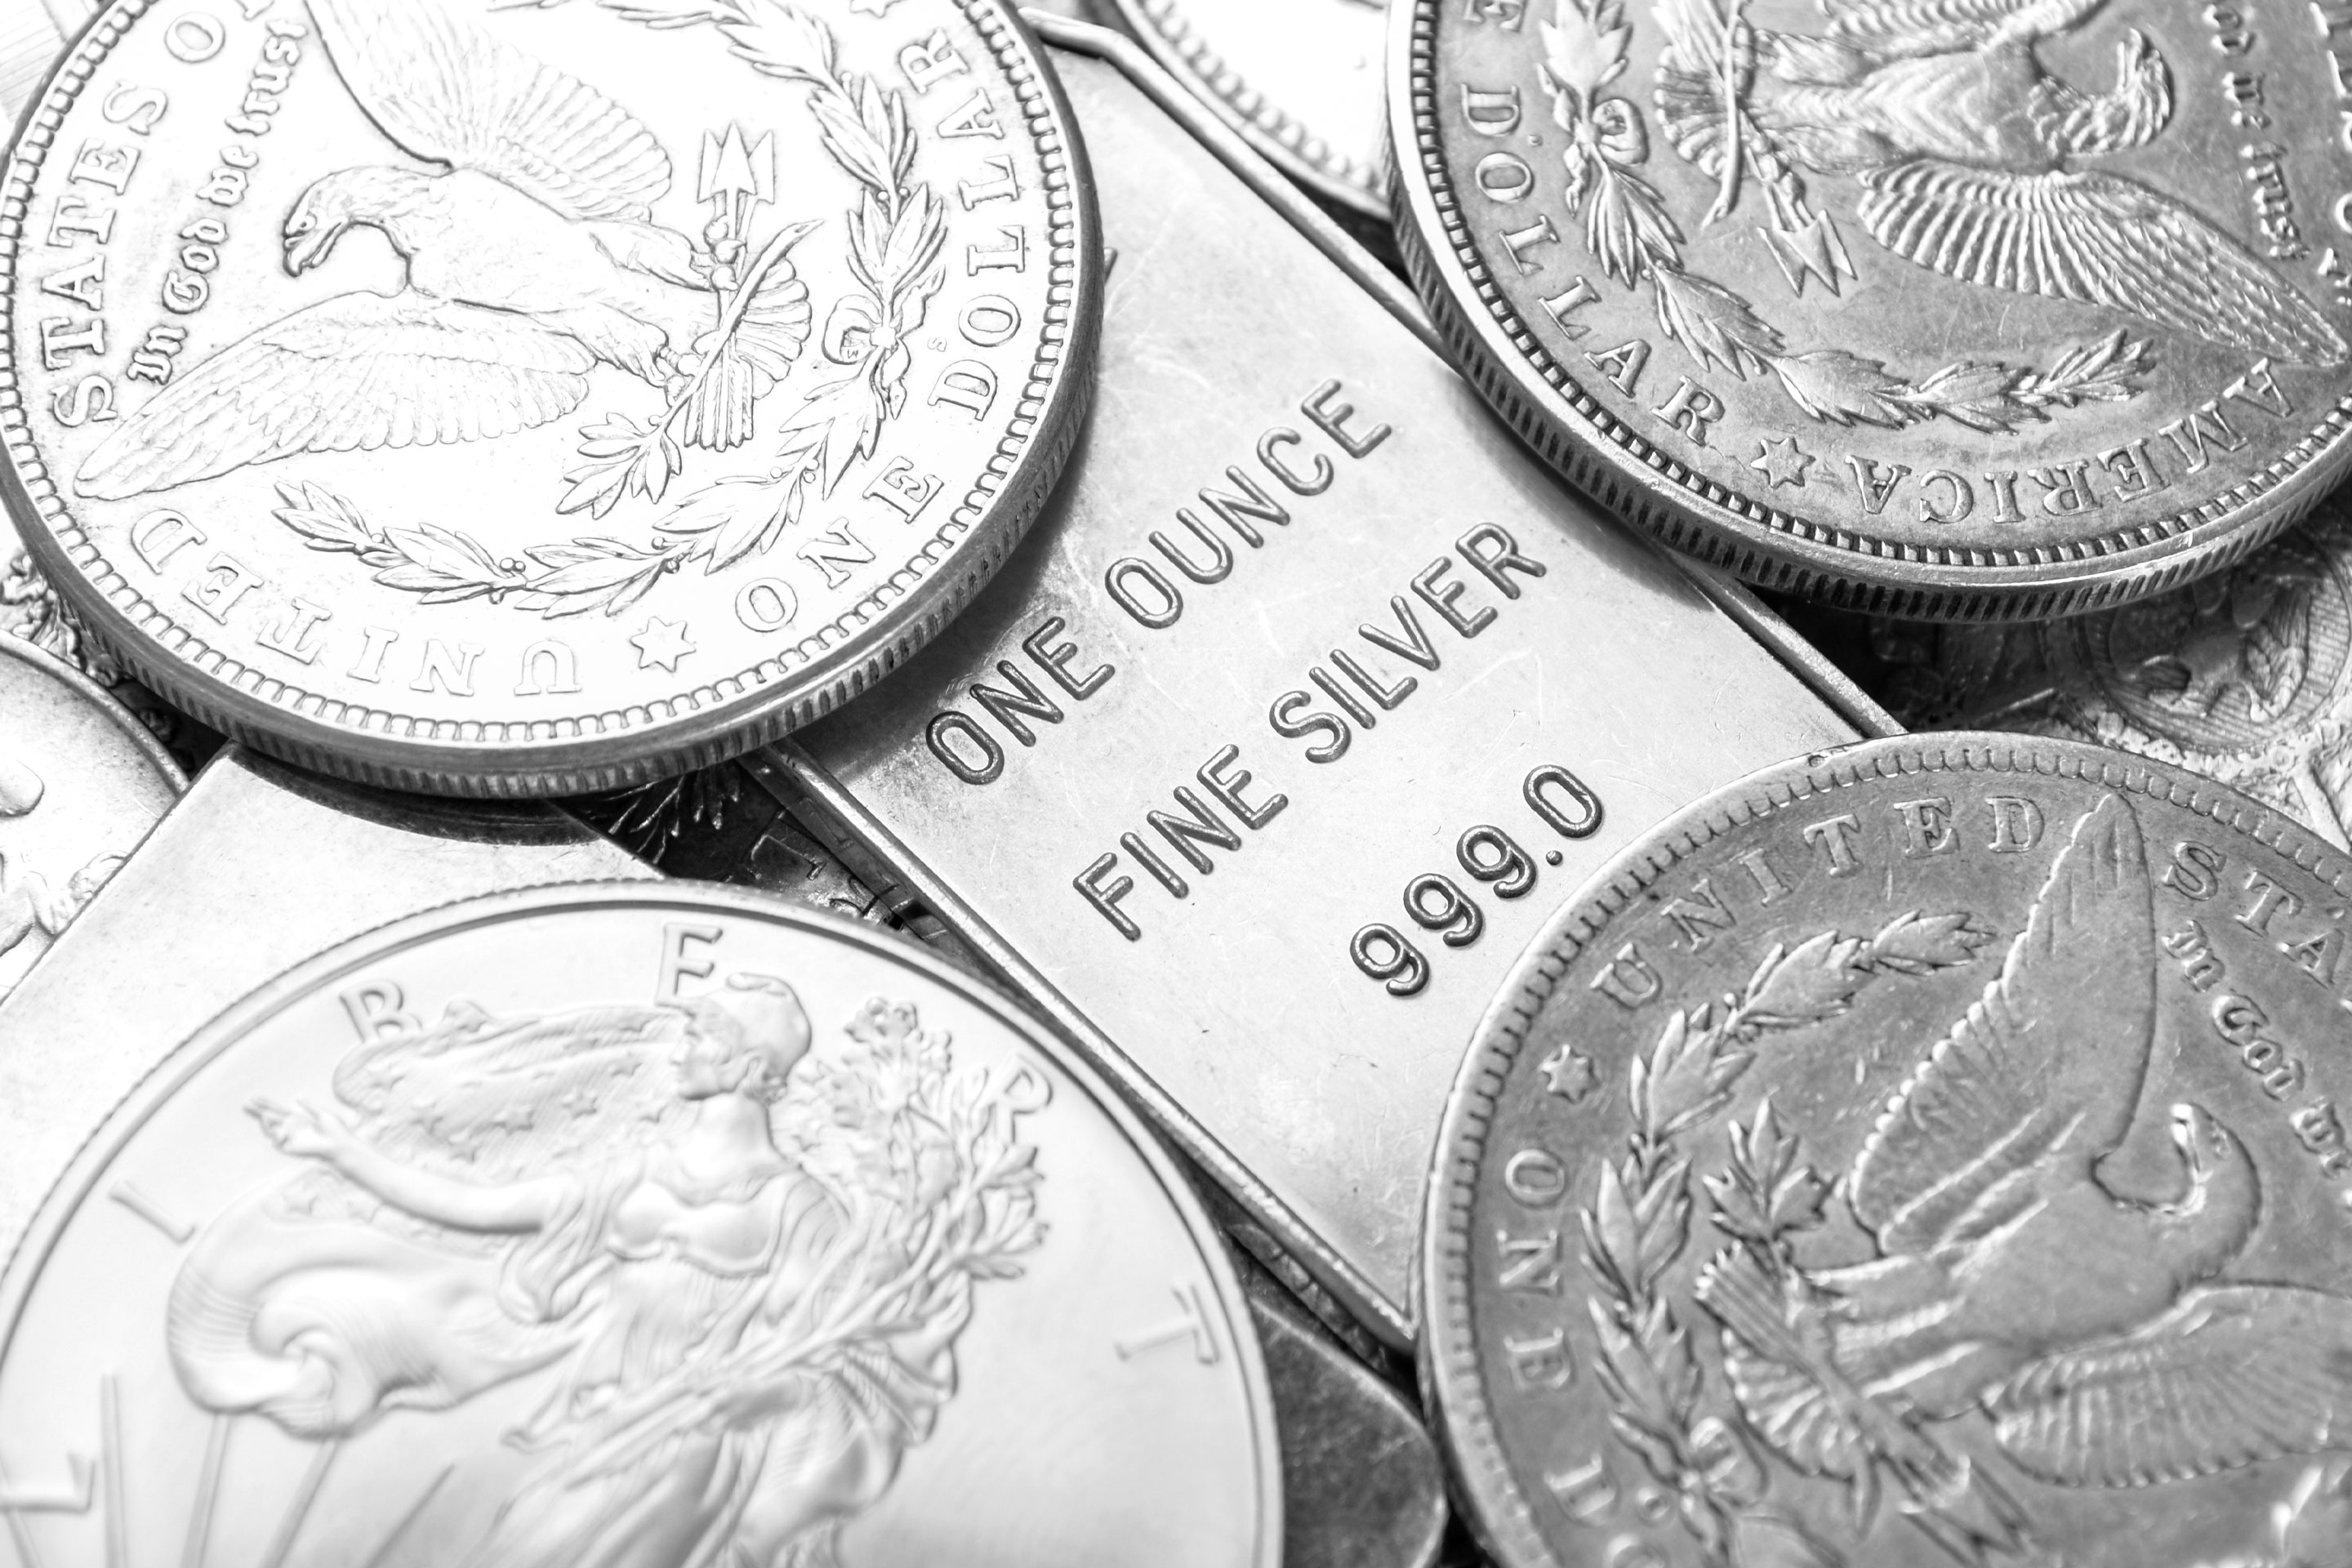 How to Invest in Silver